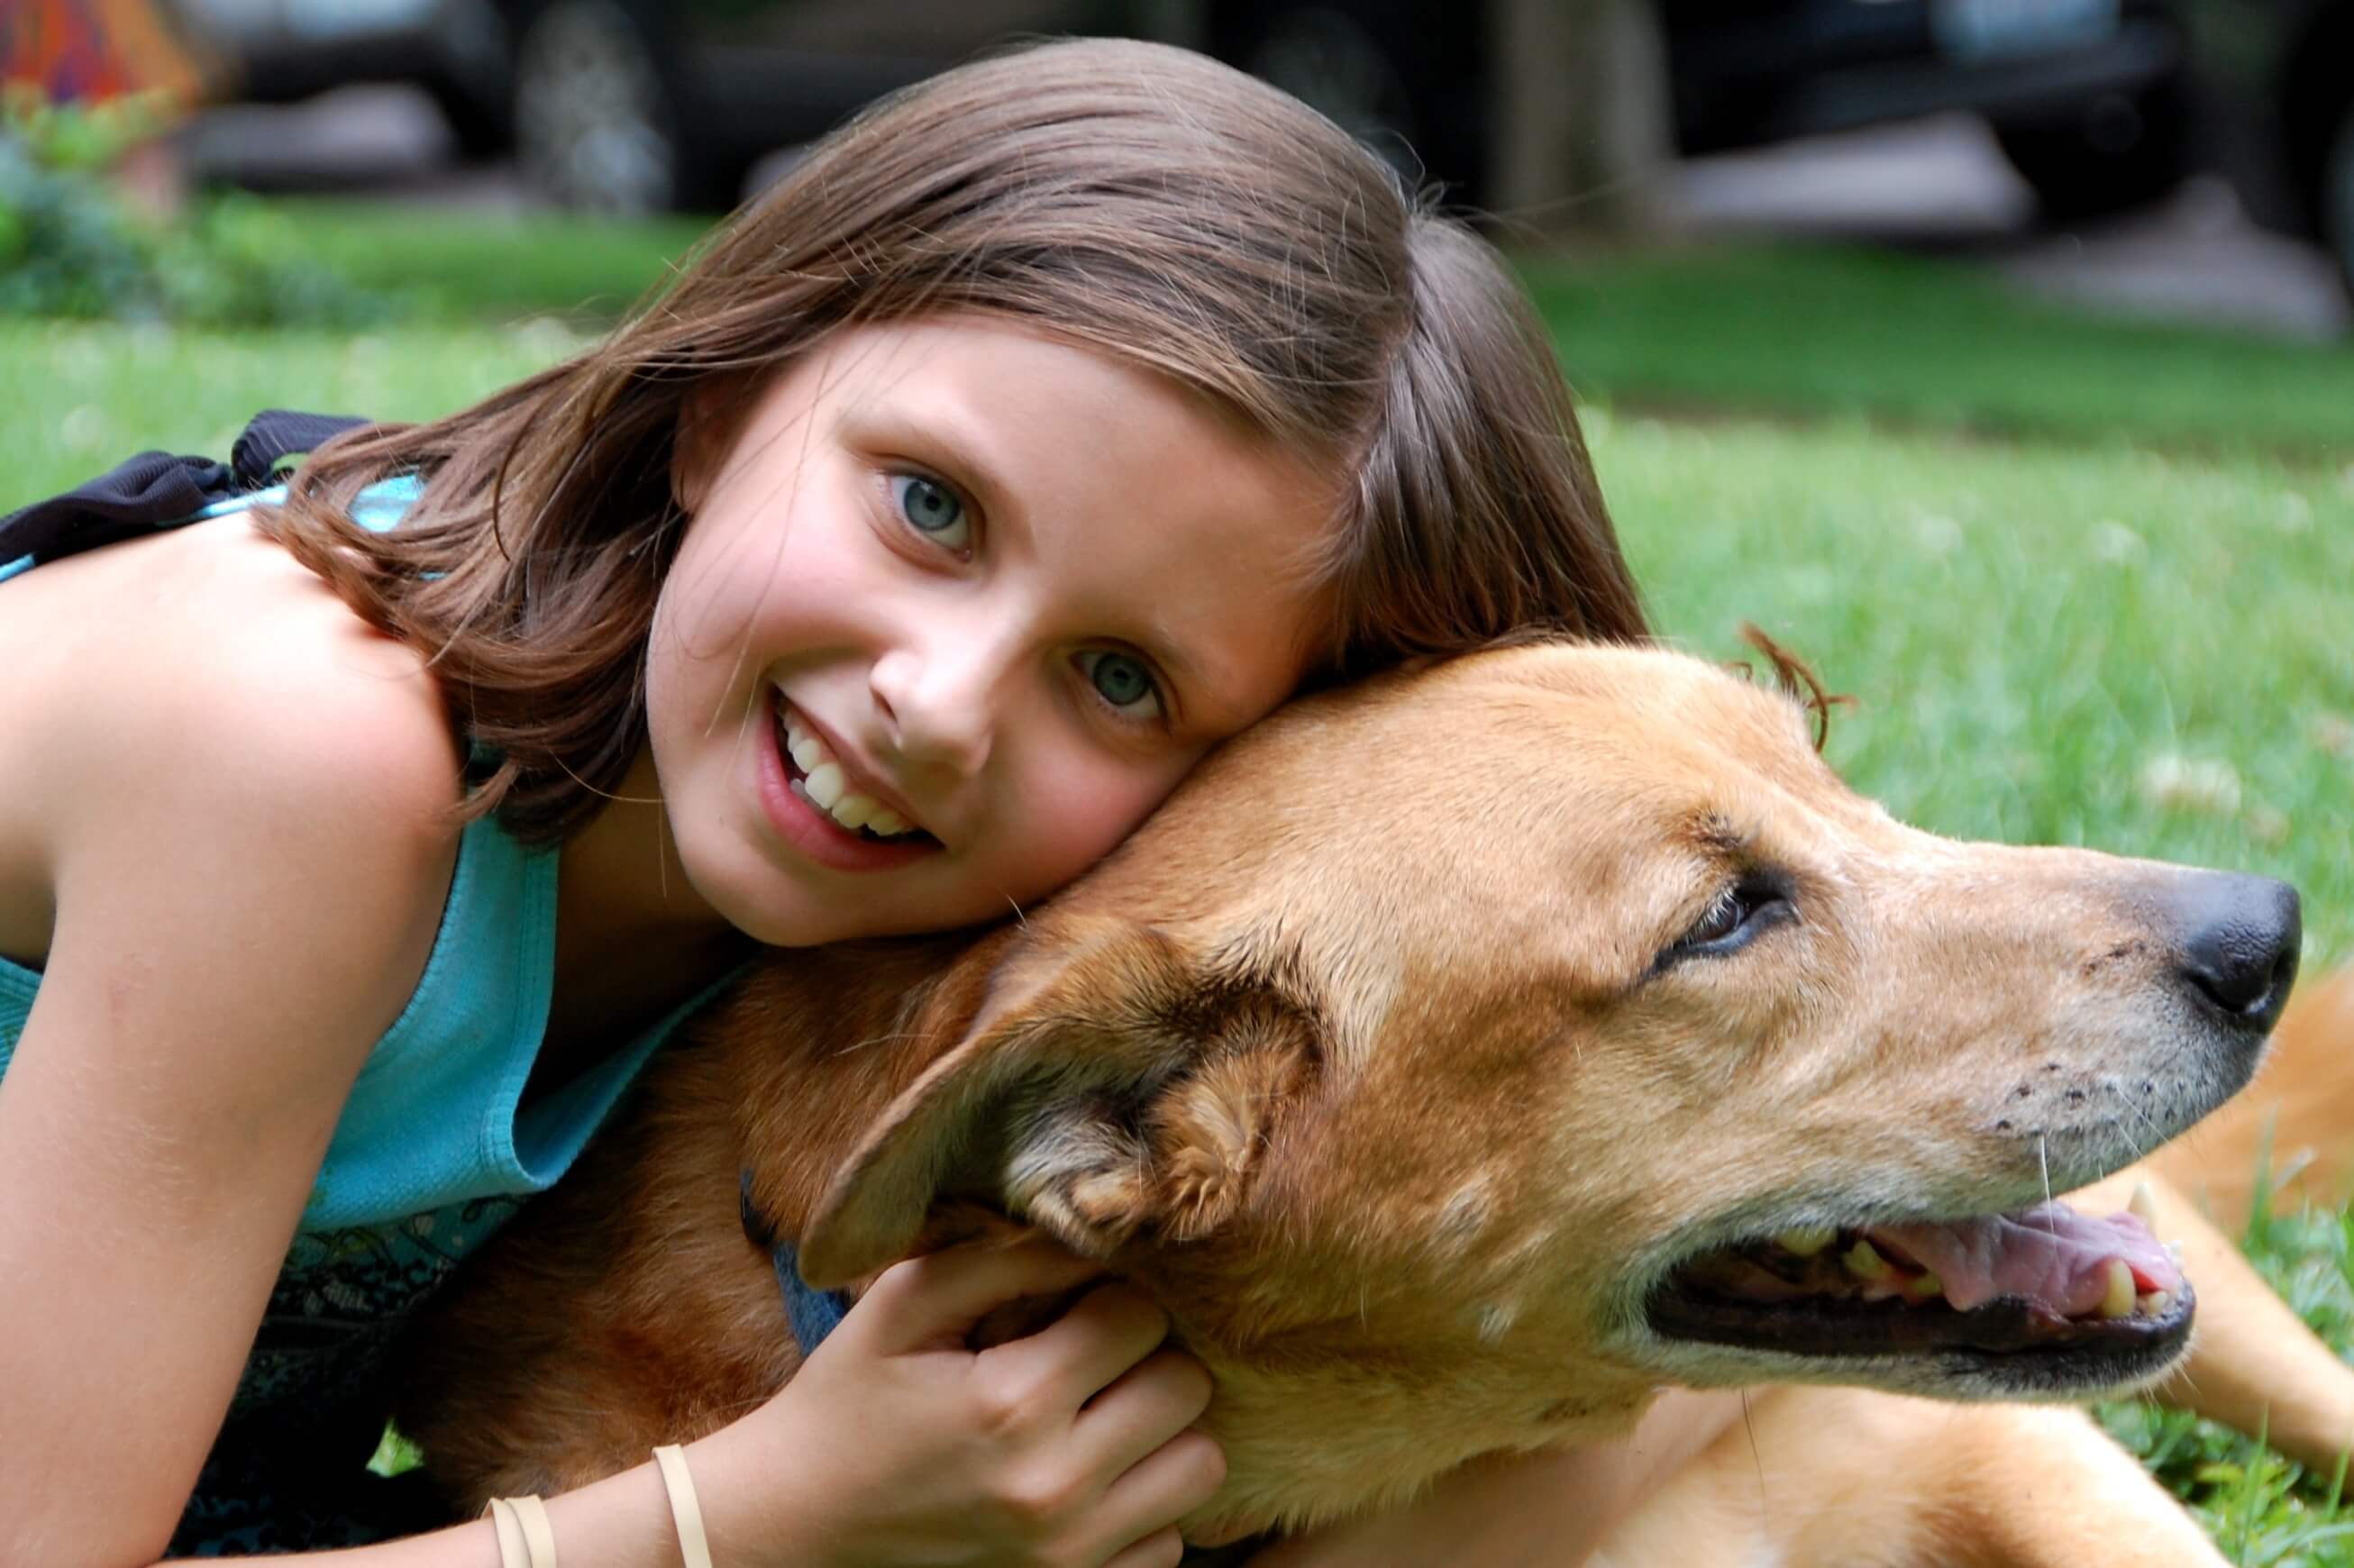 The 3 Most Valuable Lessons Kids Learn From Dogs